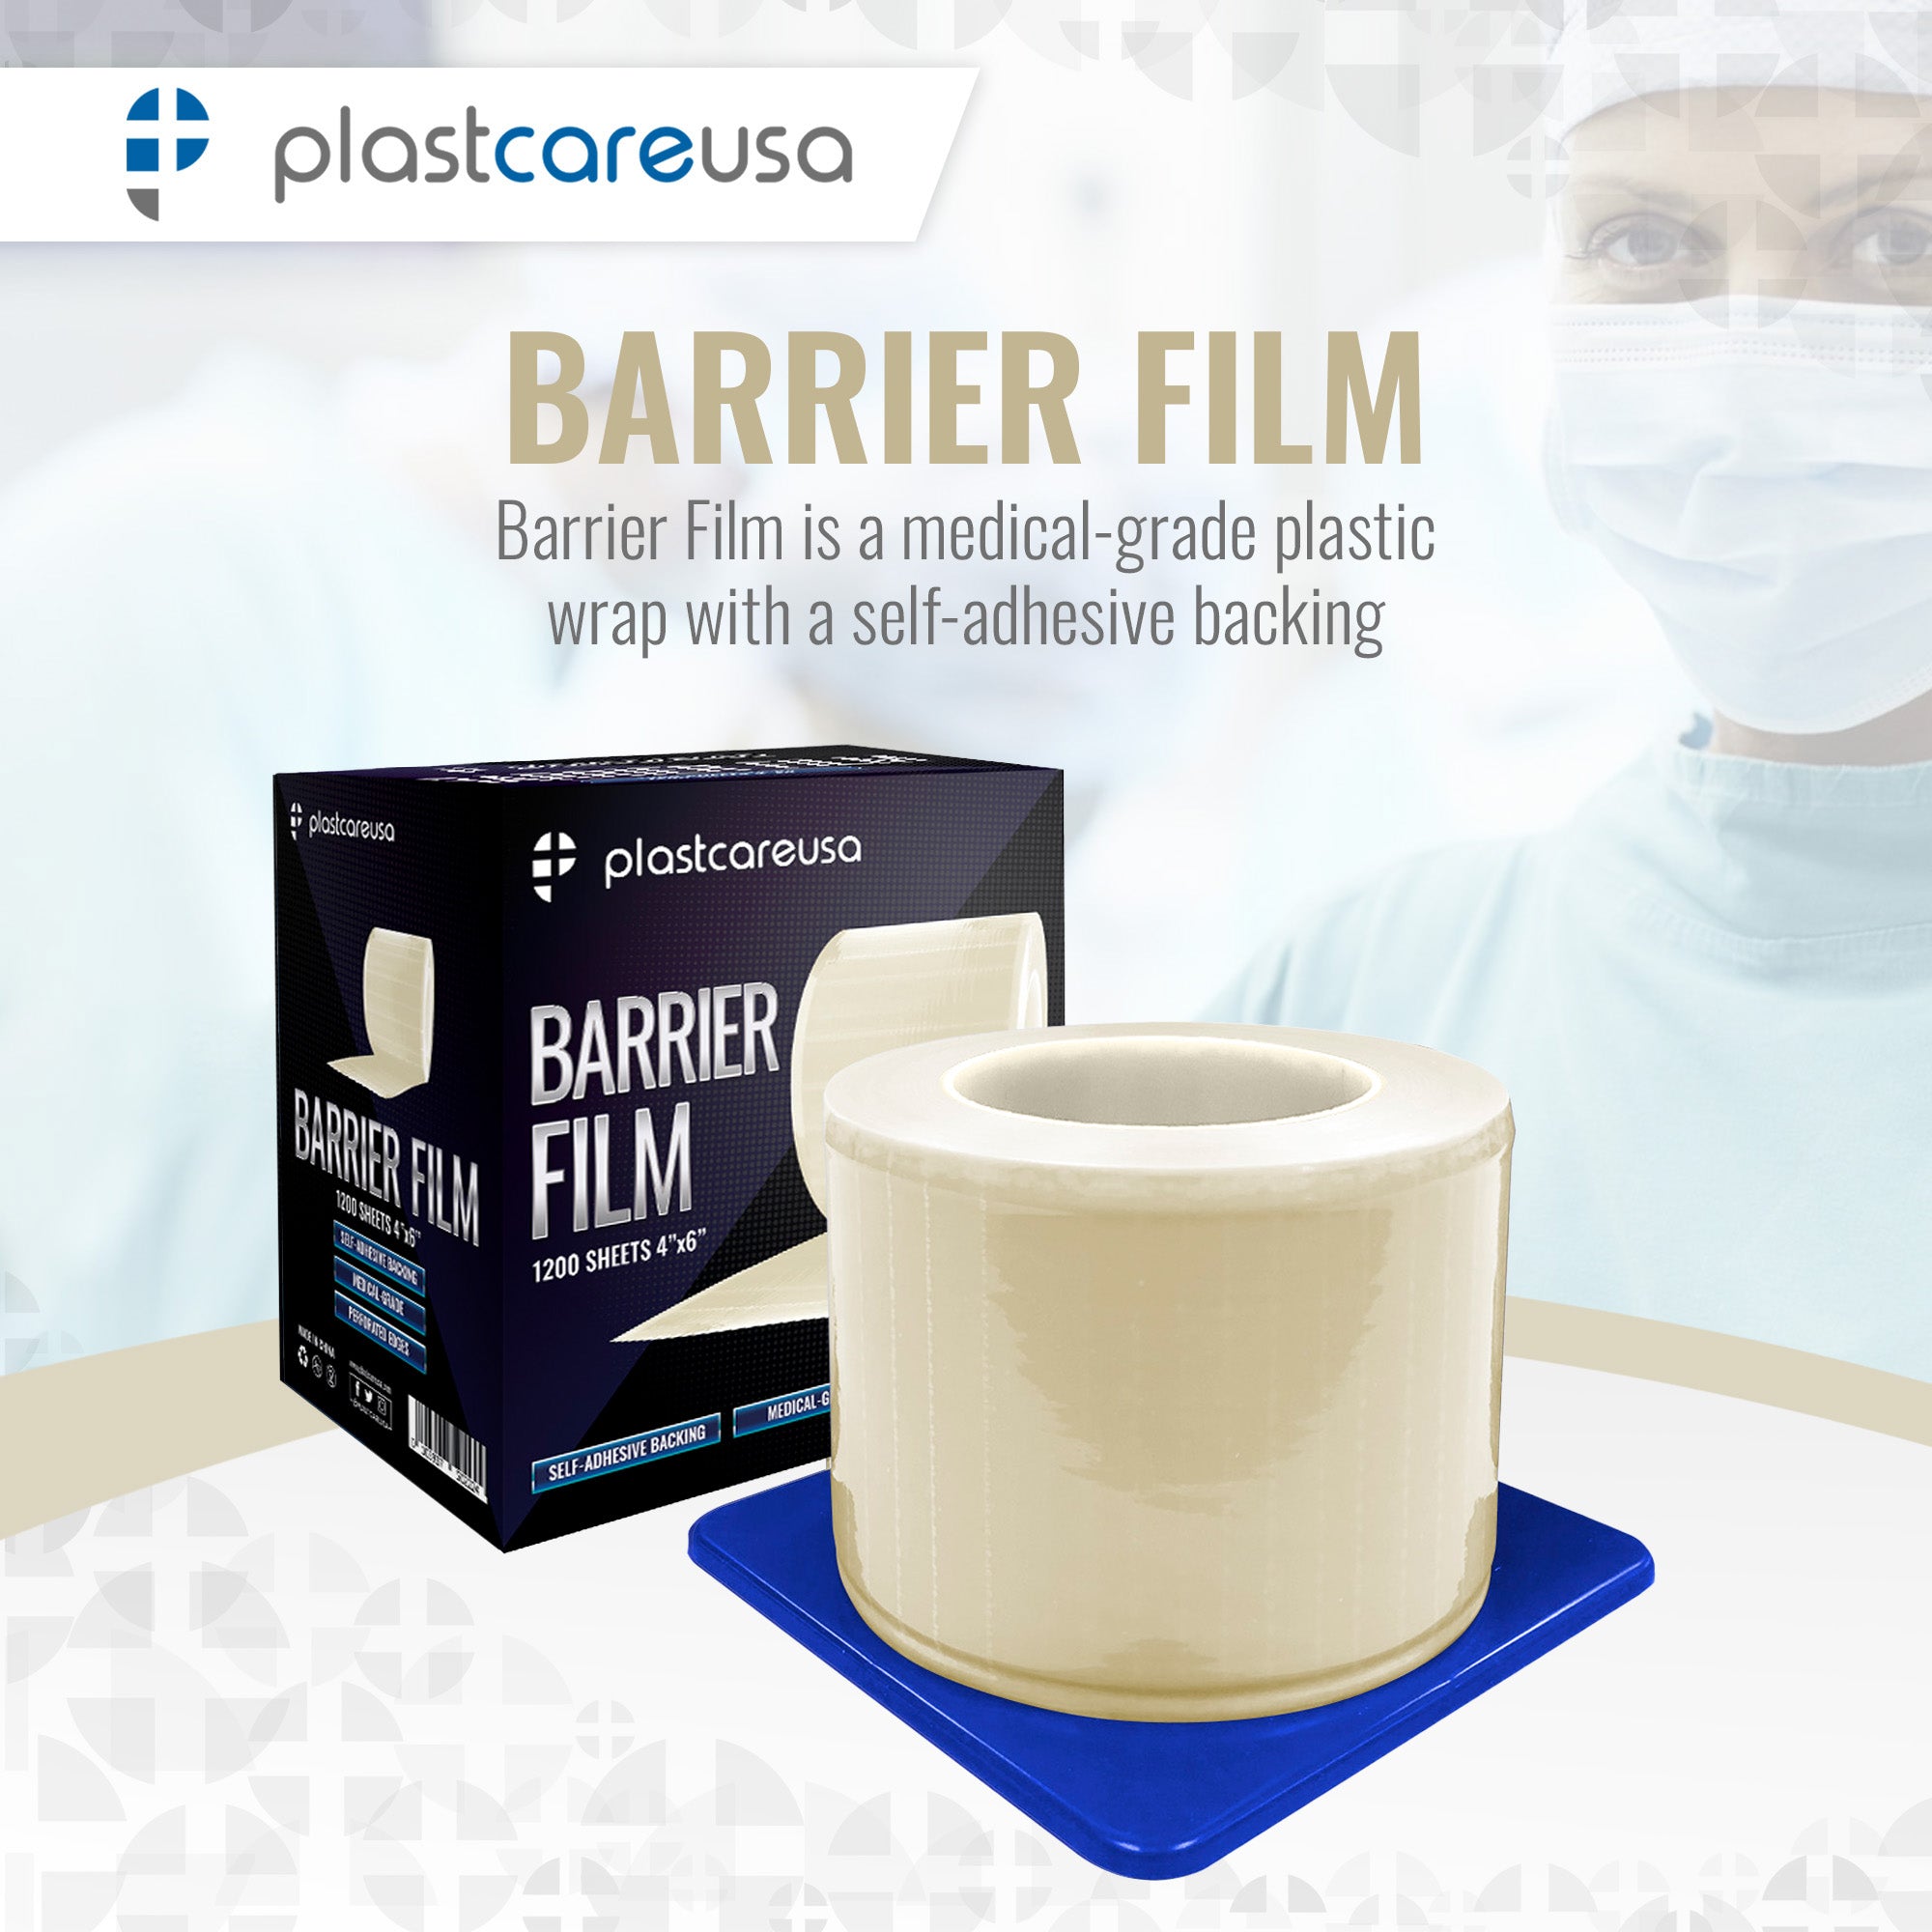 Clear Barrier Film Roll 4x6 - Protective Dental Barrier Film For Dental,  Medical, Tattoo - Perforated Adhesive Barrier Tape Sheets (1 Box of 1200